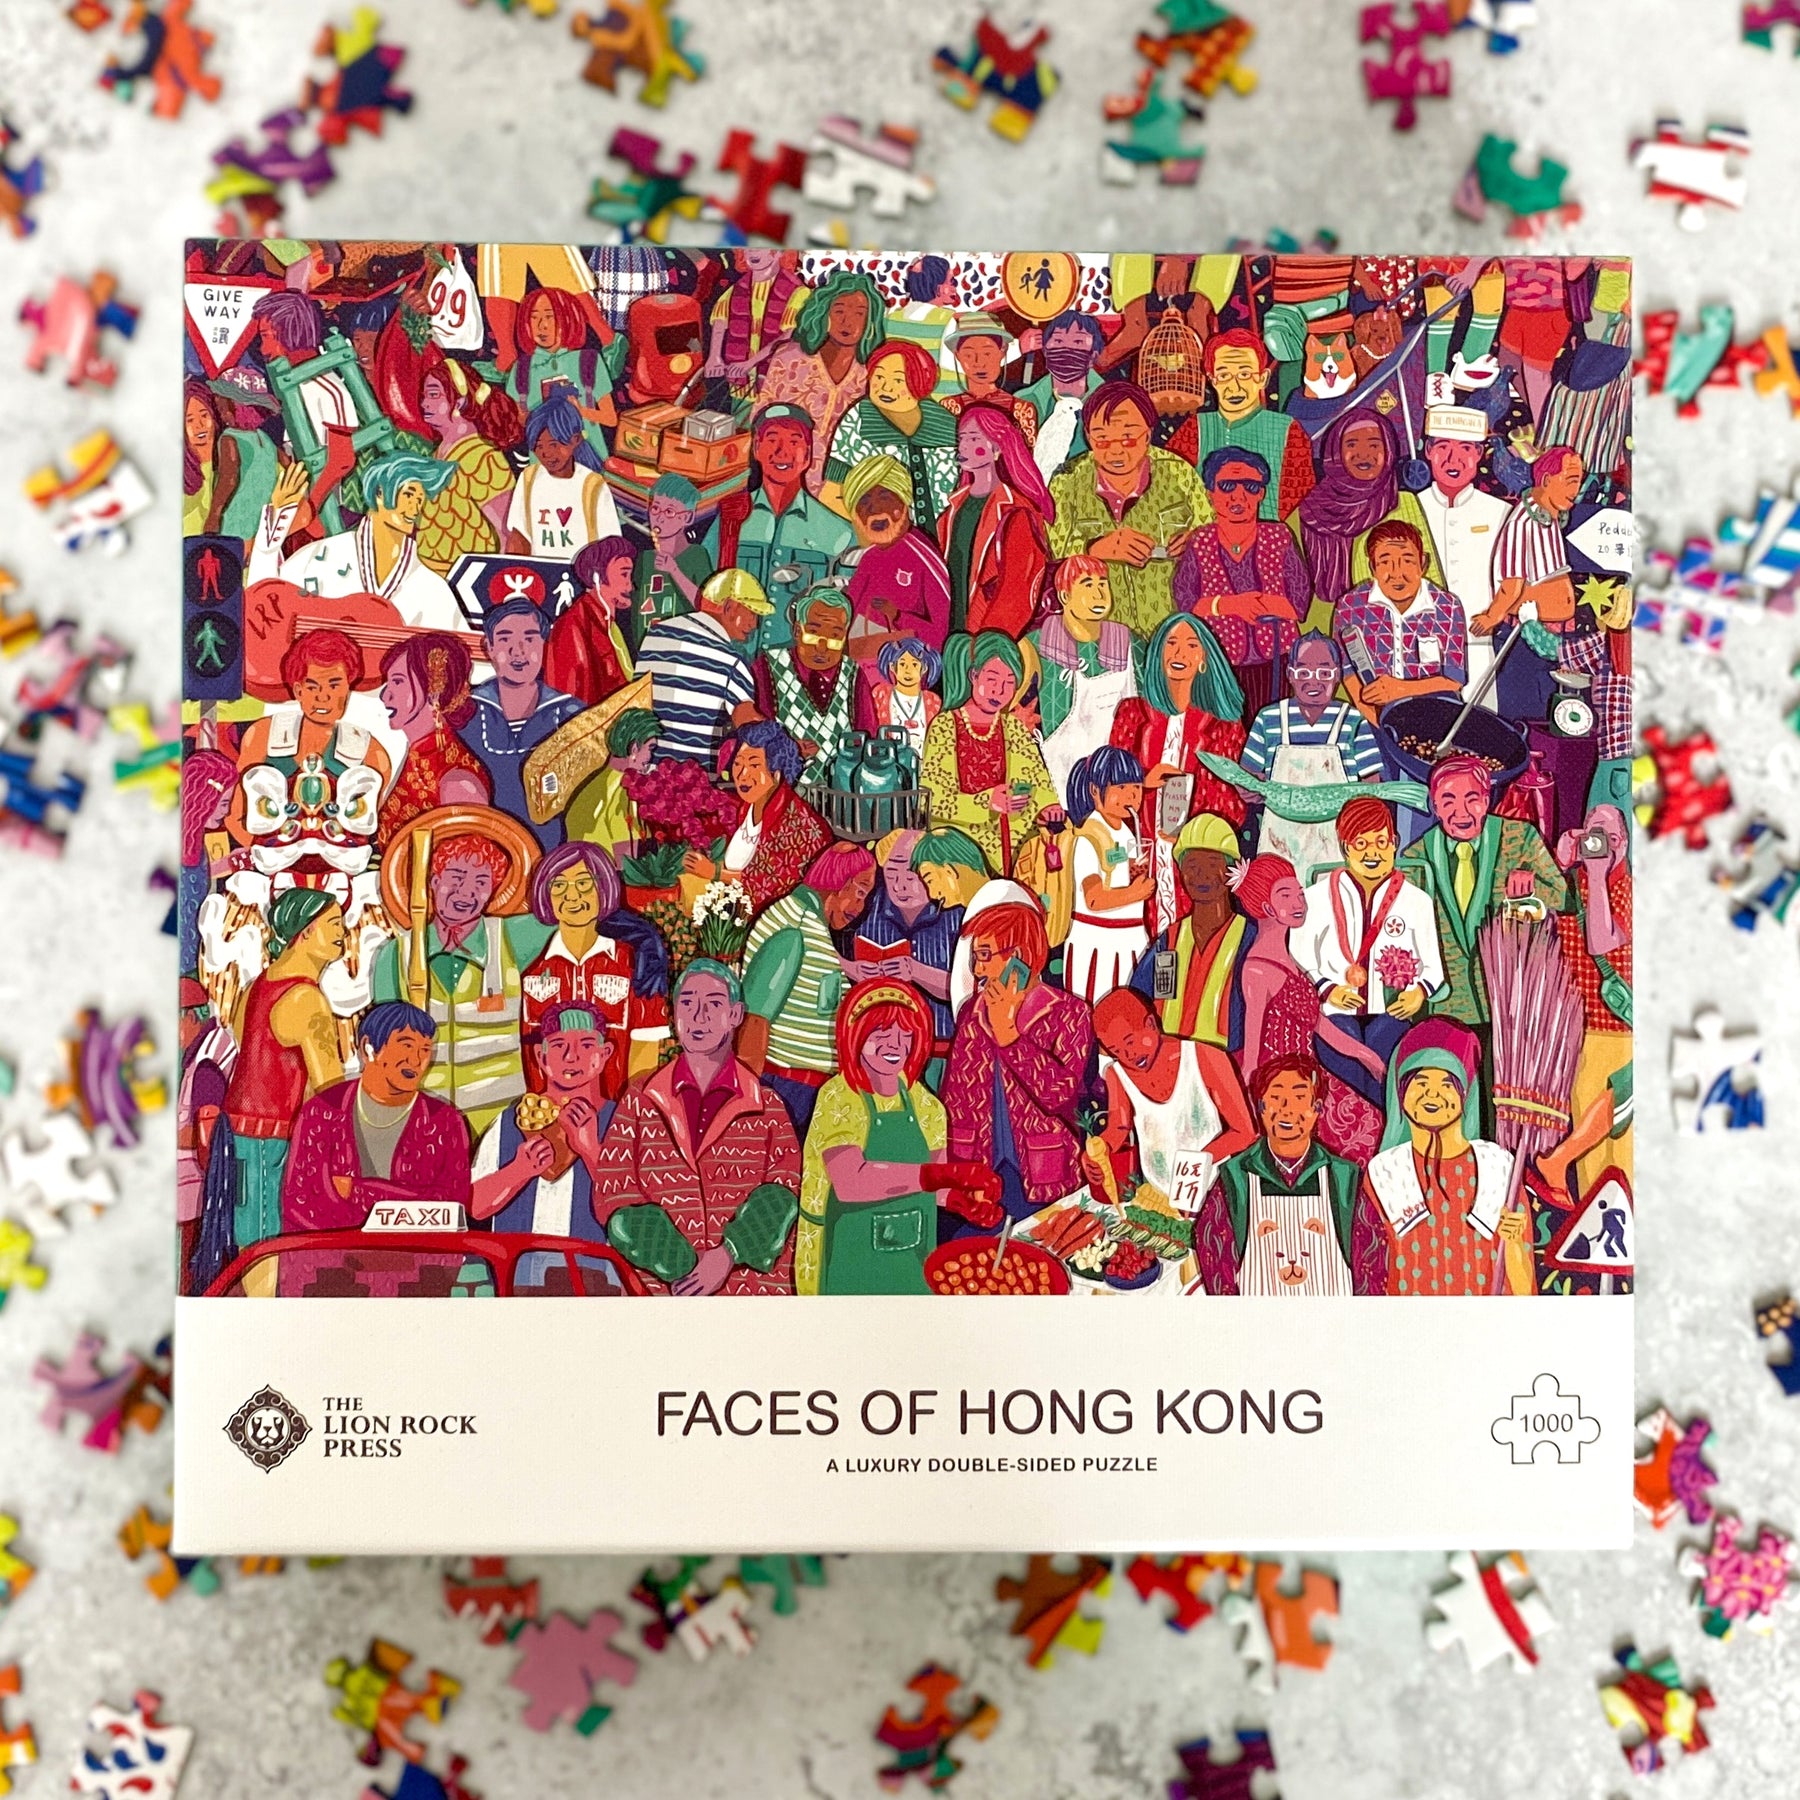 LUXURY DOUBLE-SIDED 1000pc PUZZLE: Faces of Hong Kong